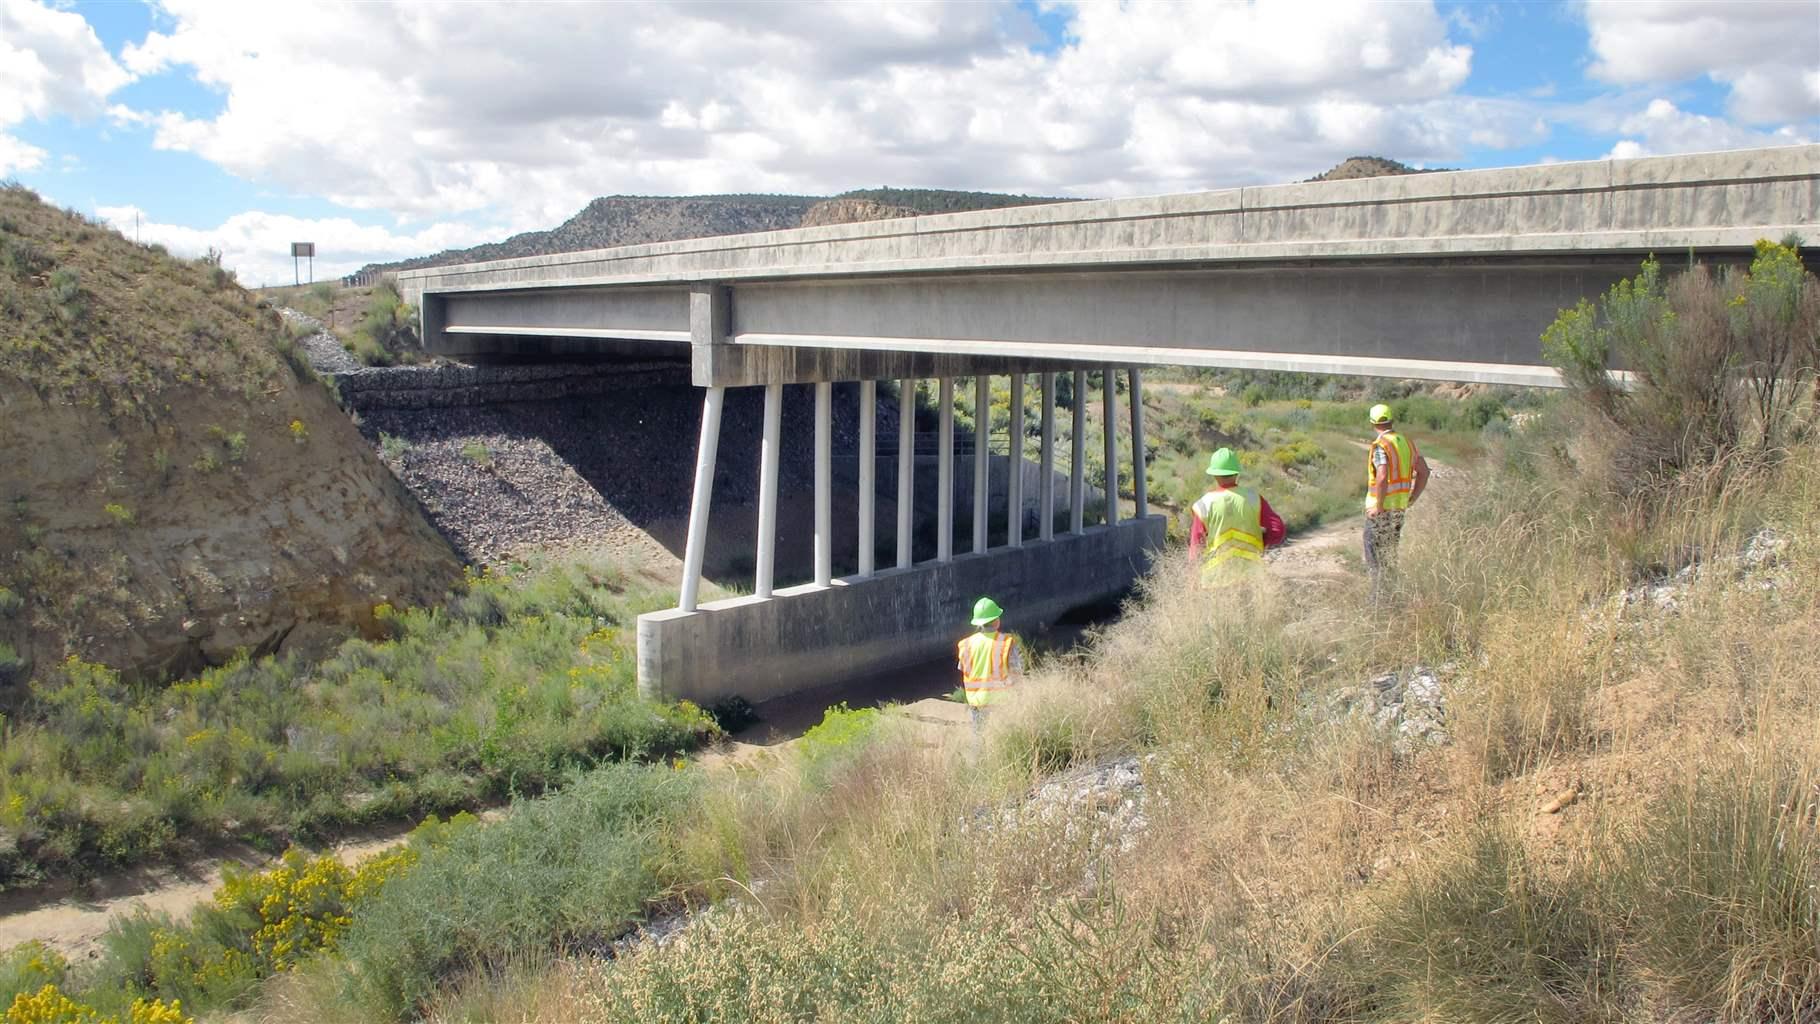 NMDOT employees inspect a bridge over the Rio Puerco built in 2019. U.S. Highway 550 south of Cuba is an area that state officials identified as a high wildlife-vehicle collision hotspot.